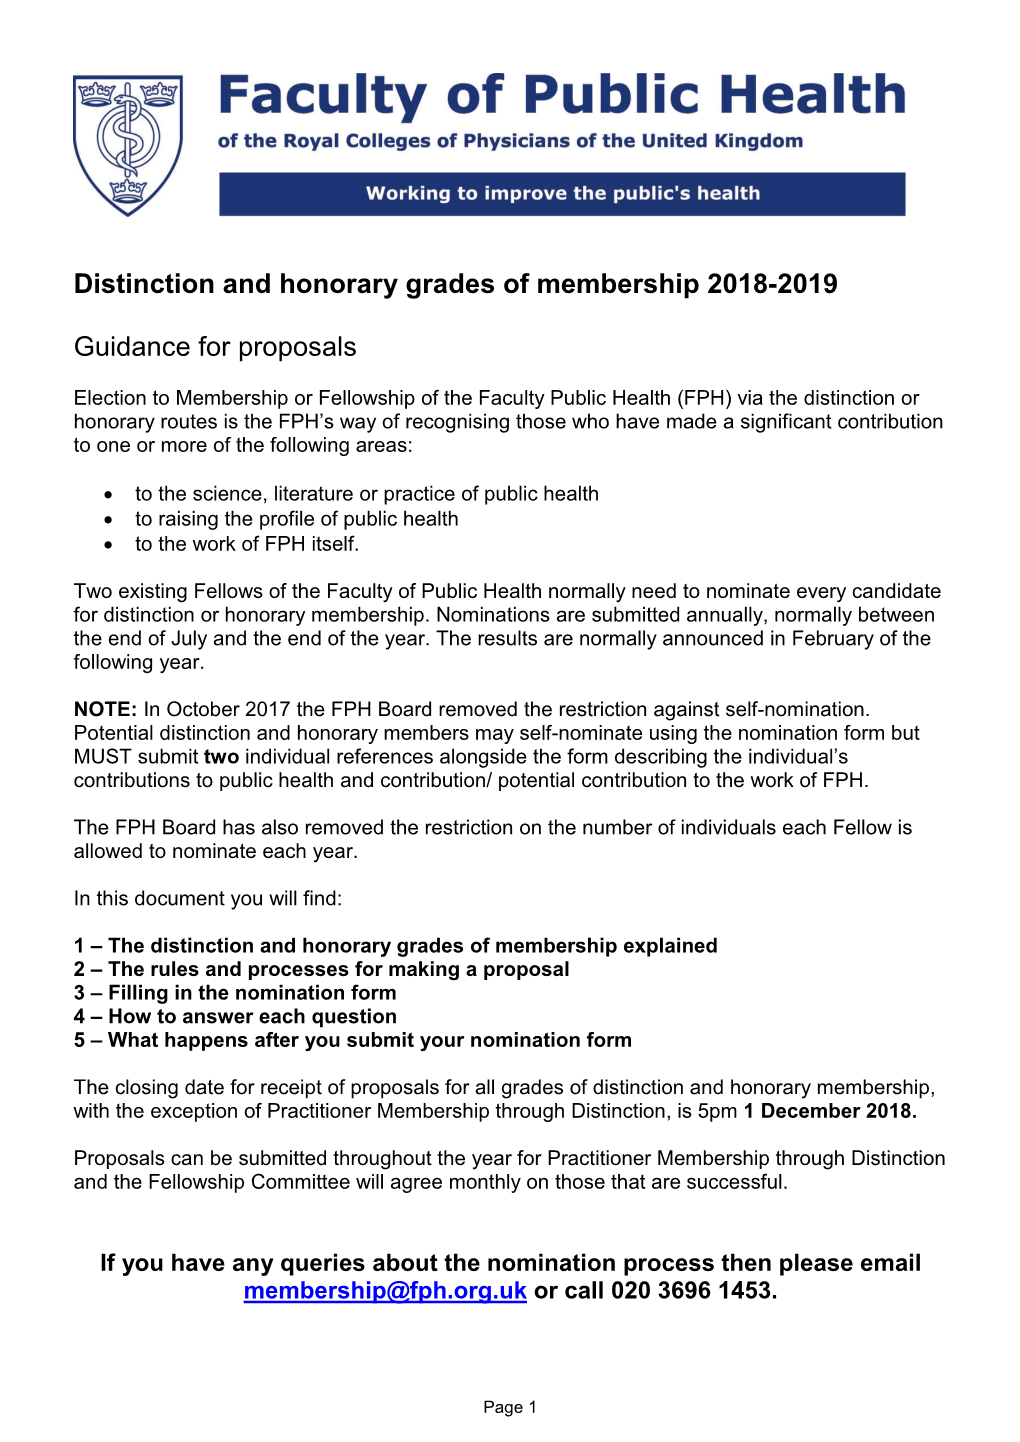 Distinction and Honorary Grades of Membership 2018-2019 Guidance